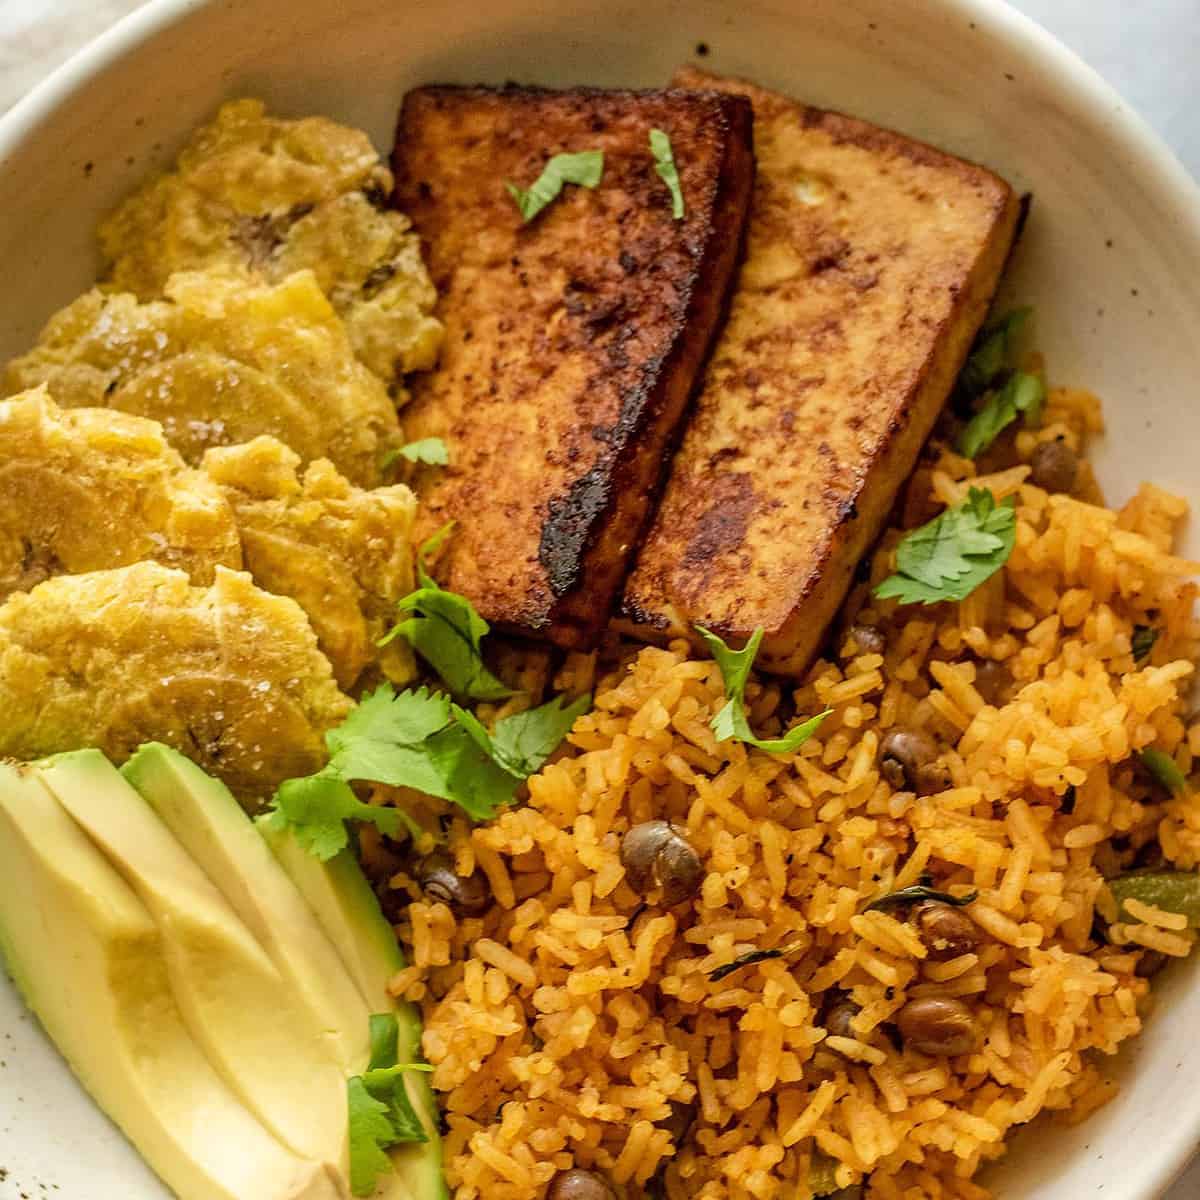  A vegan spin on a classic Puerto Rican dish.